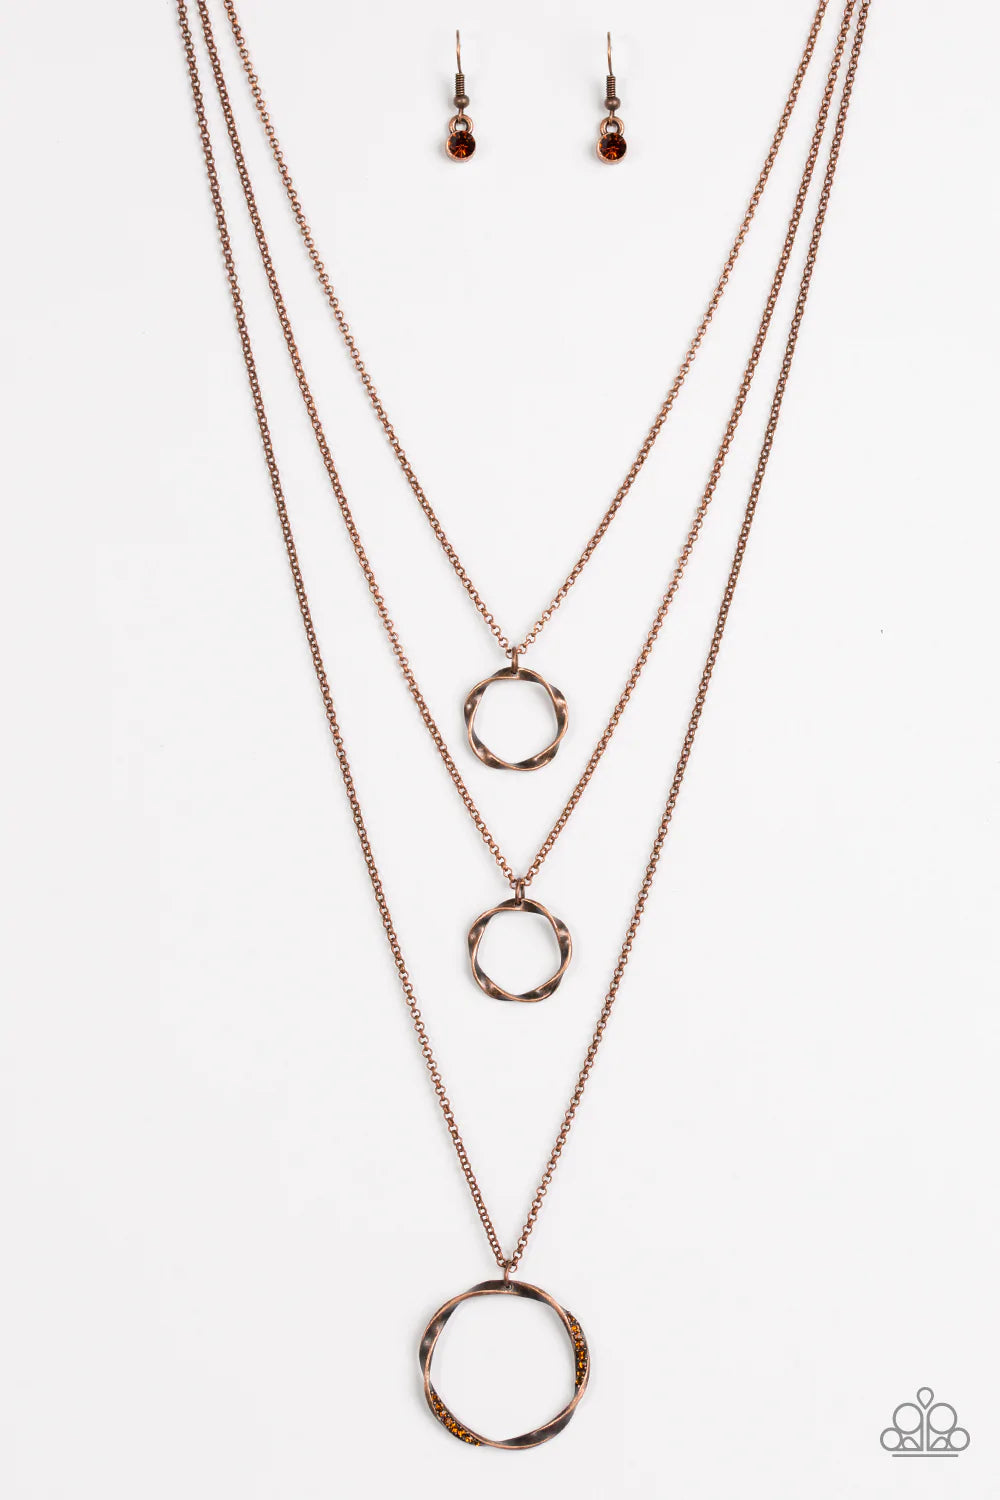 Paparazzi Necklace ~ Timelessly Twisted - Copper